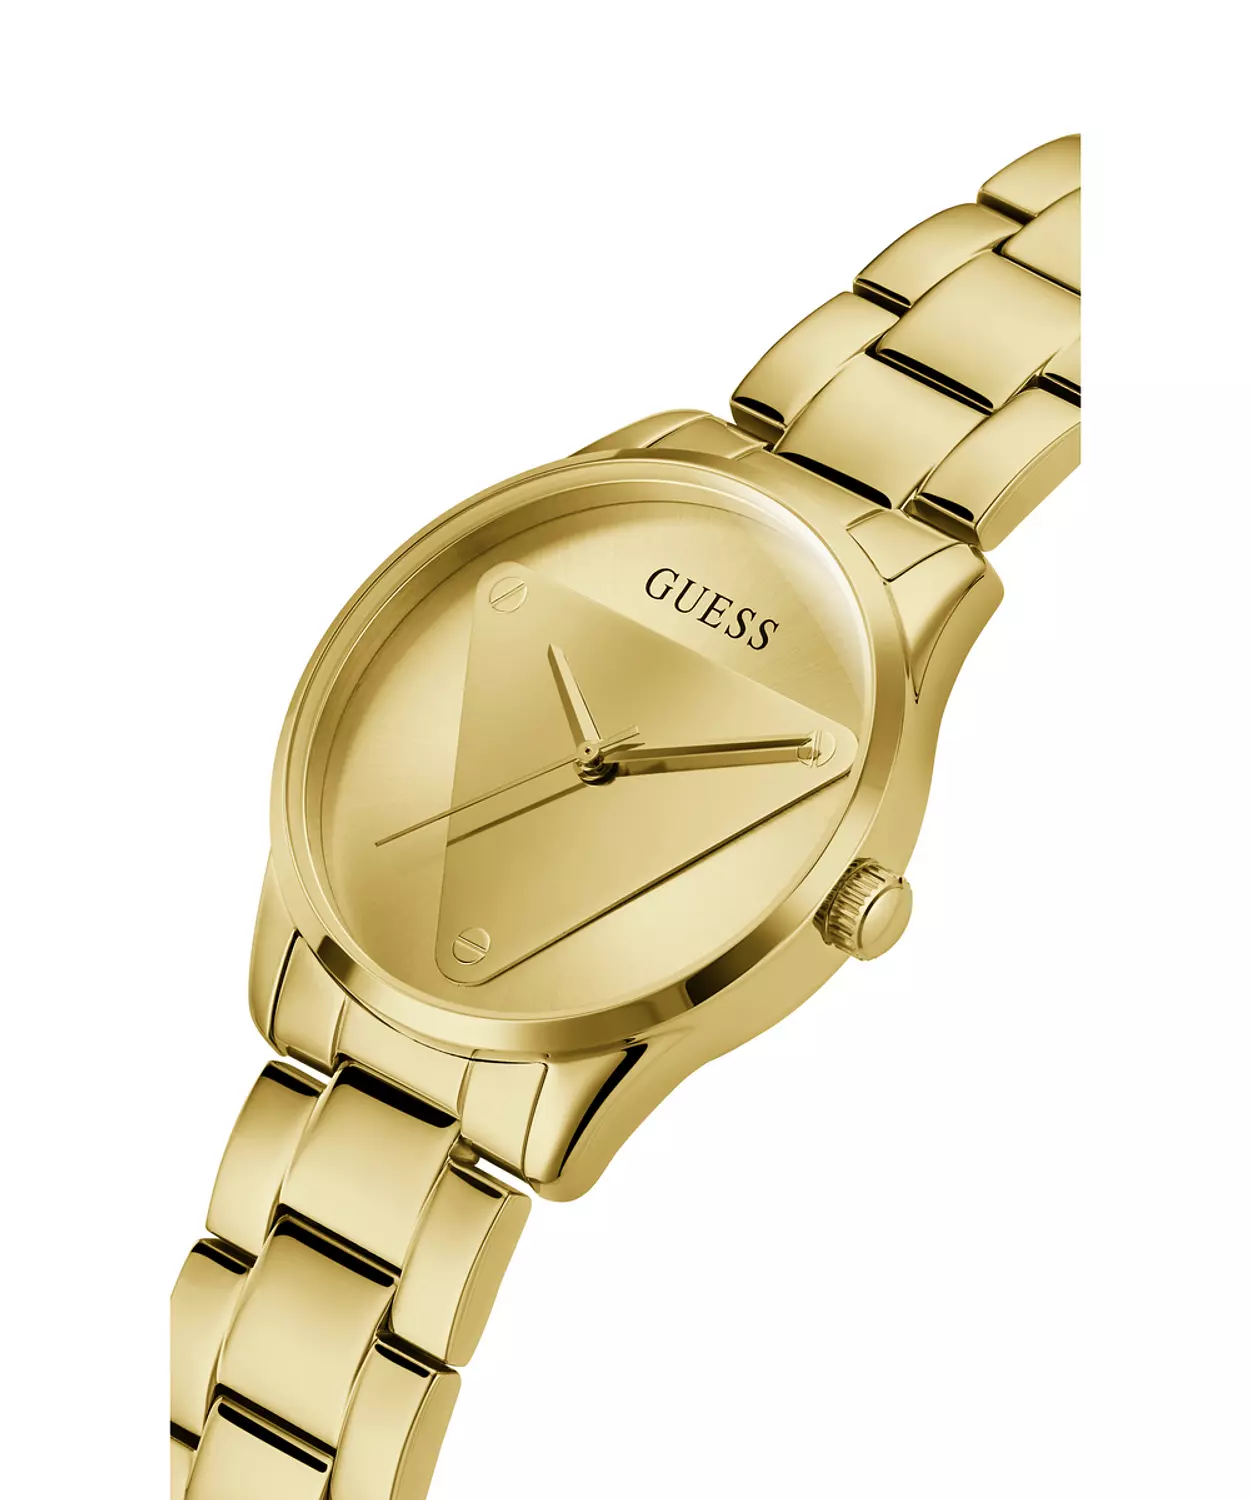 GUESS GW0485L1 ANALOG WATCH  For Women Gold Stainless Steel Polished Bracelet  2